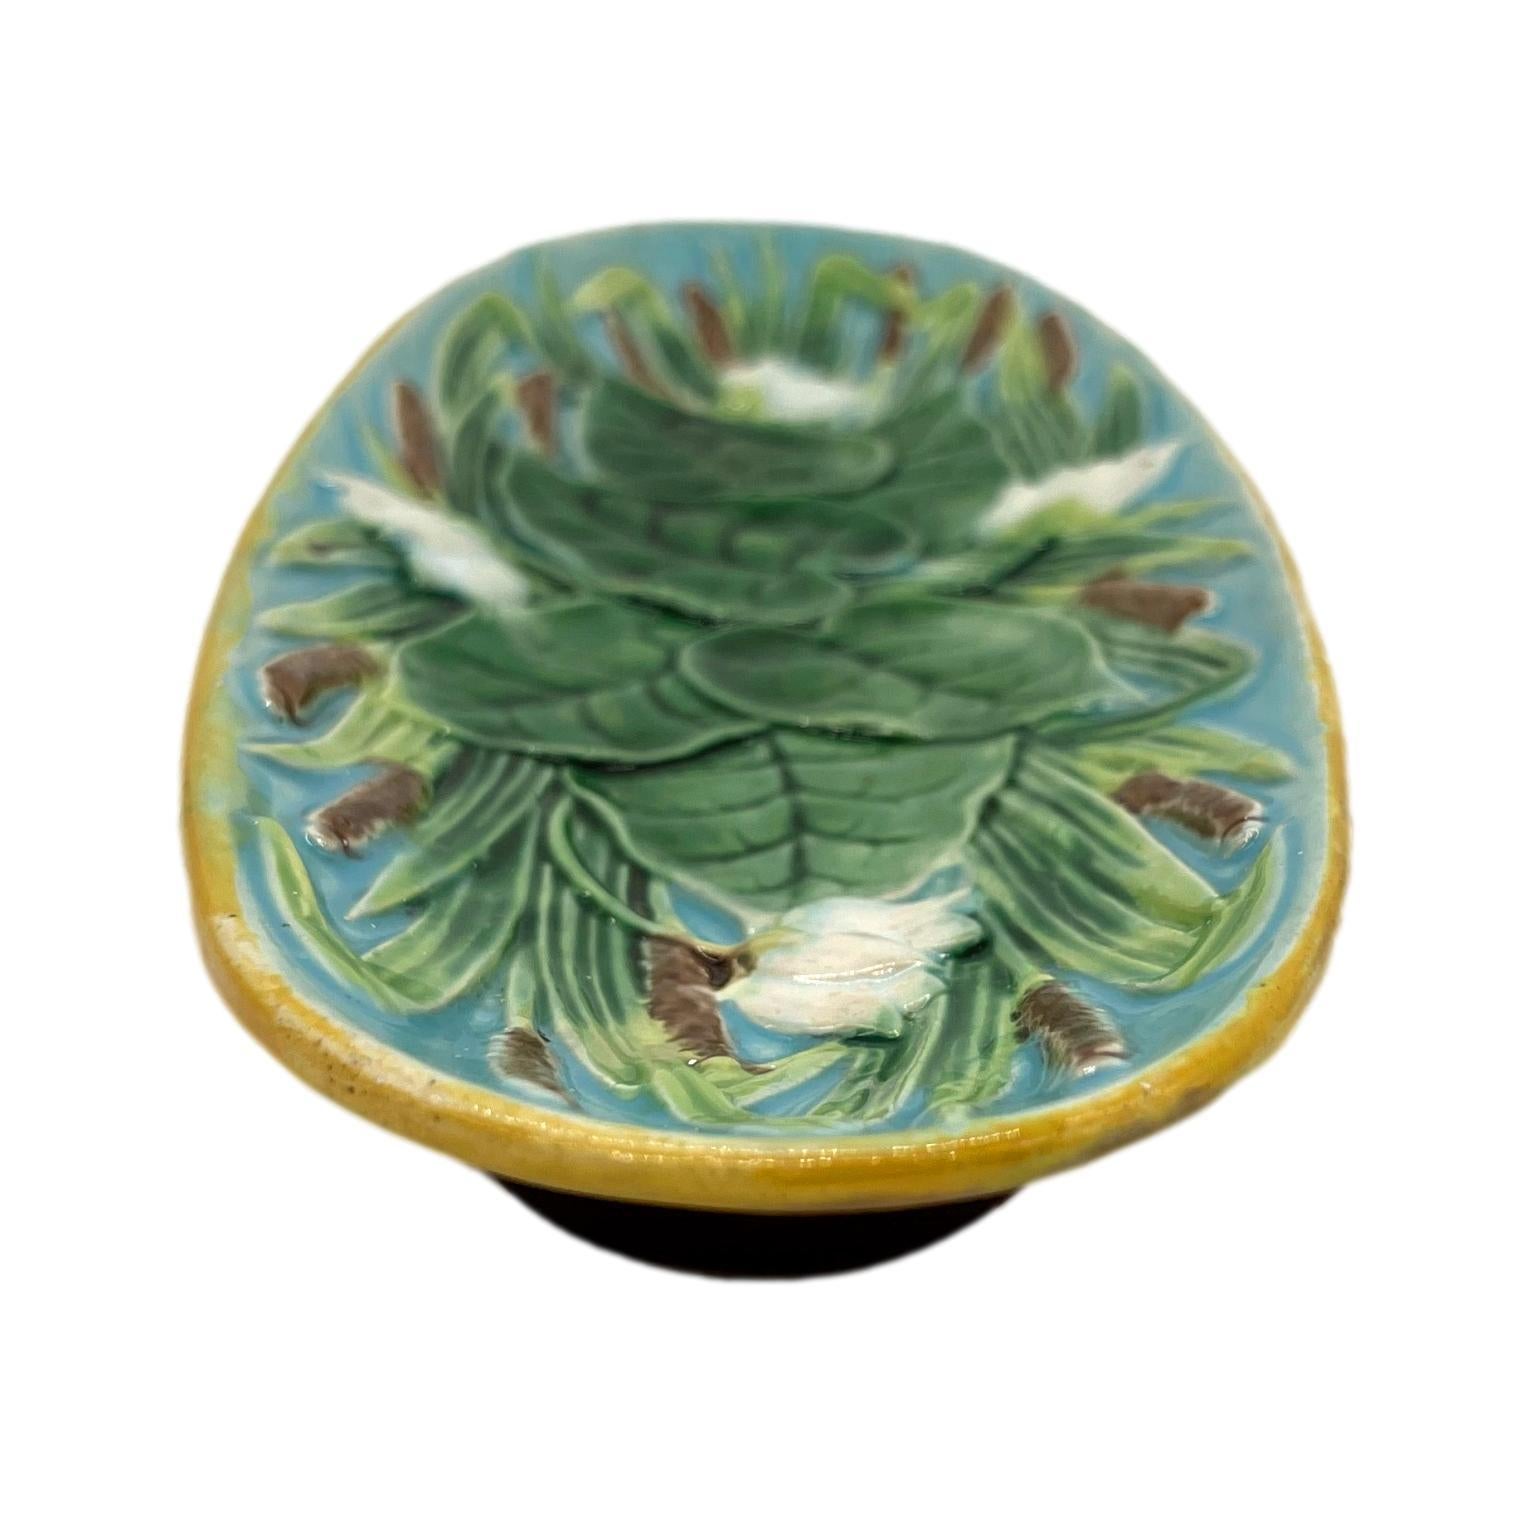 Molded George Jones Majolica Pond Lilies and Bullrushes 10-in Tray, English, c. 1875 For Sale